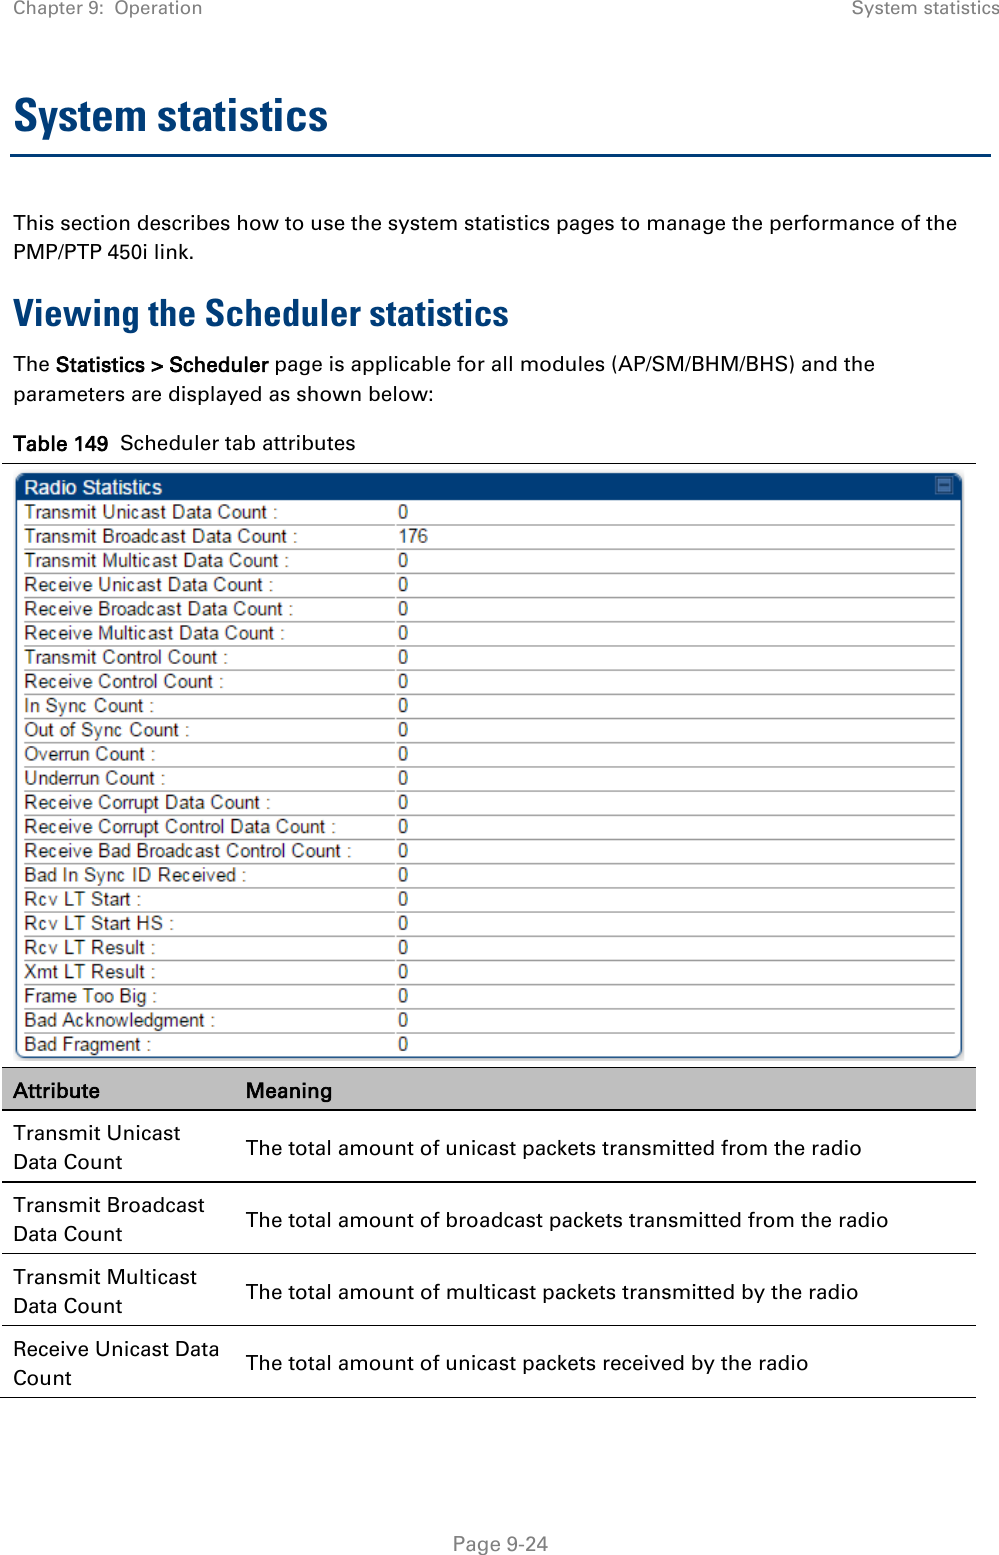 Chapter 9:  Operation System statistics   Page 9-24 System statistics This section describes how to use the system statistics pages to manage the performance of the PMP/PTP 450i link. Viewing the Scheduler statistics The Statistics &gt; Scheduler page is applicable for all modules (AP/SM/BHM/BHS) and the parameters are displayed as shown below: Table 149  Scheduler tab attributes  Attribute Meaning Transmit Unicast Data Count The total amount of unicast packets transmitted from the radio Transmit Broadcast Data Count The total amount of broadcast packets transmitted from the radio Transmit Multicast Data Count The total amount of multicast packets transmitted by the radio Receive Unicast Data Count The total amount of unicast packets received by the radio 